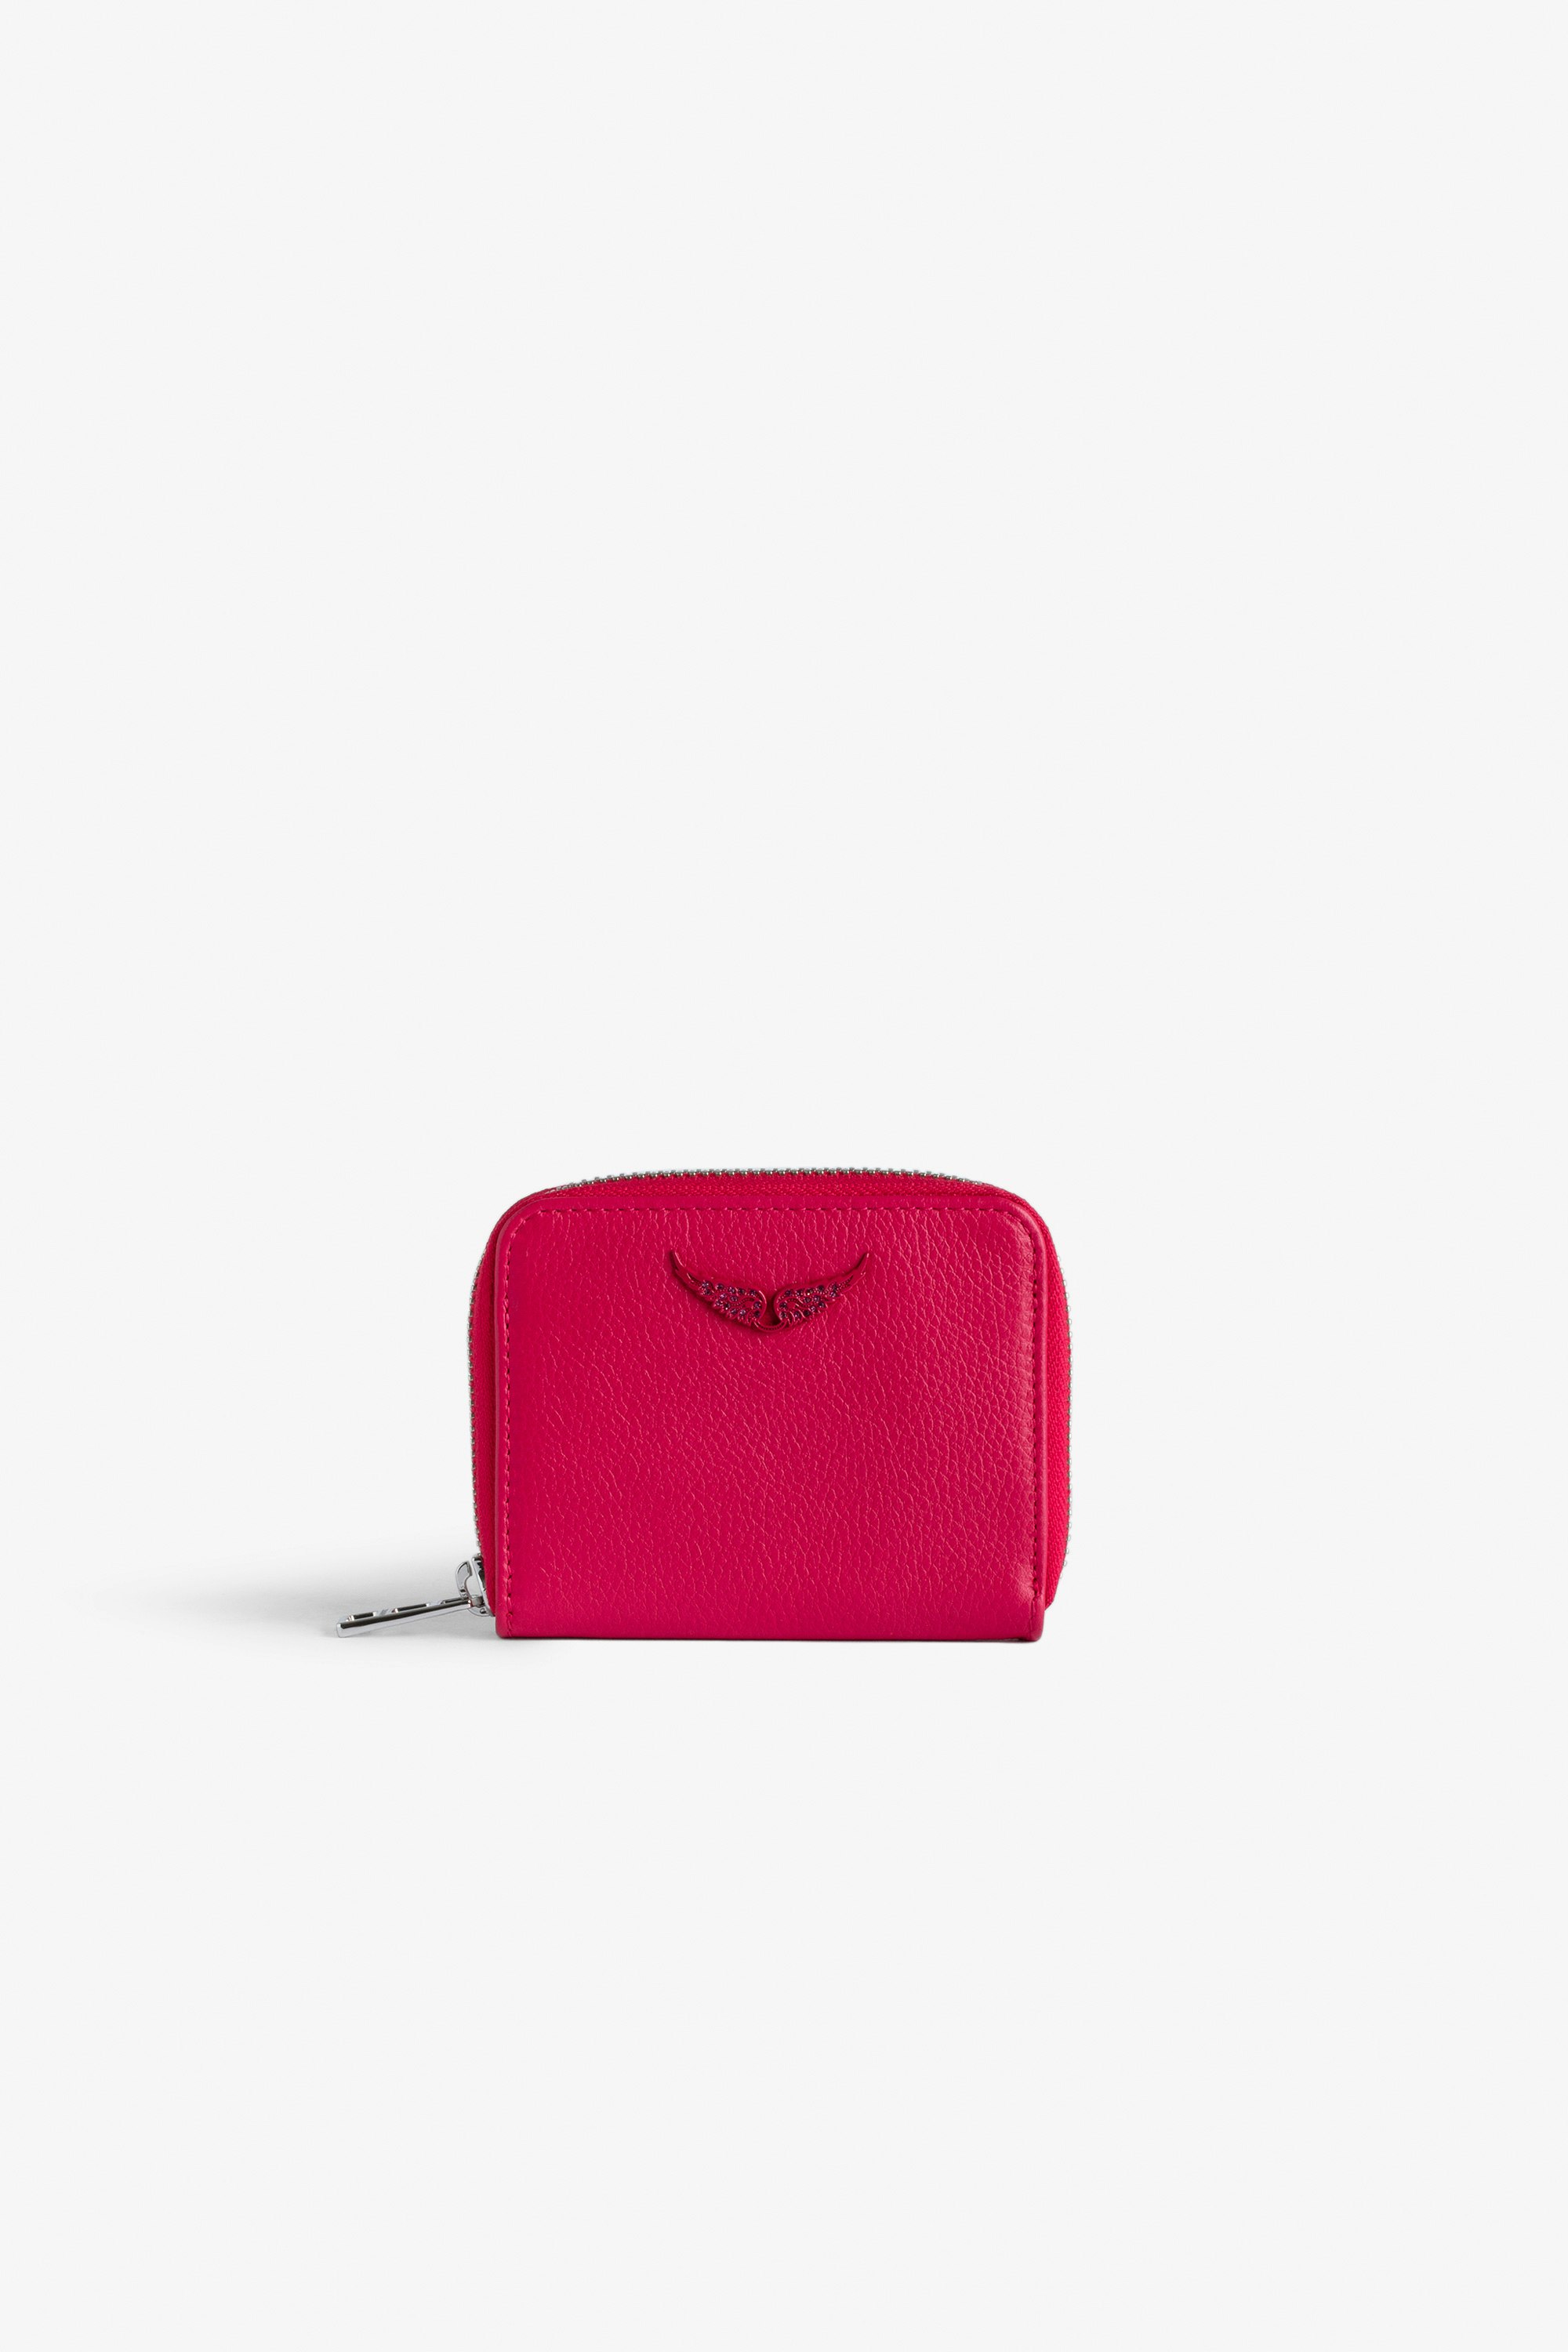 Mini ZV Coin 財布 - Women’s pink grained leather wallet with diamanté wings charm.